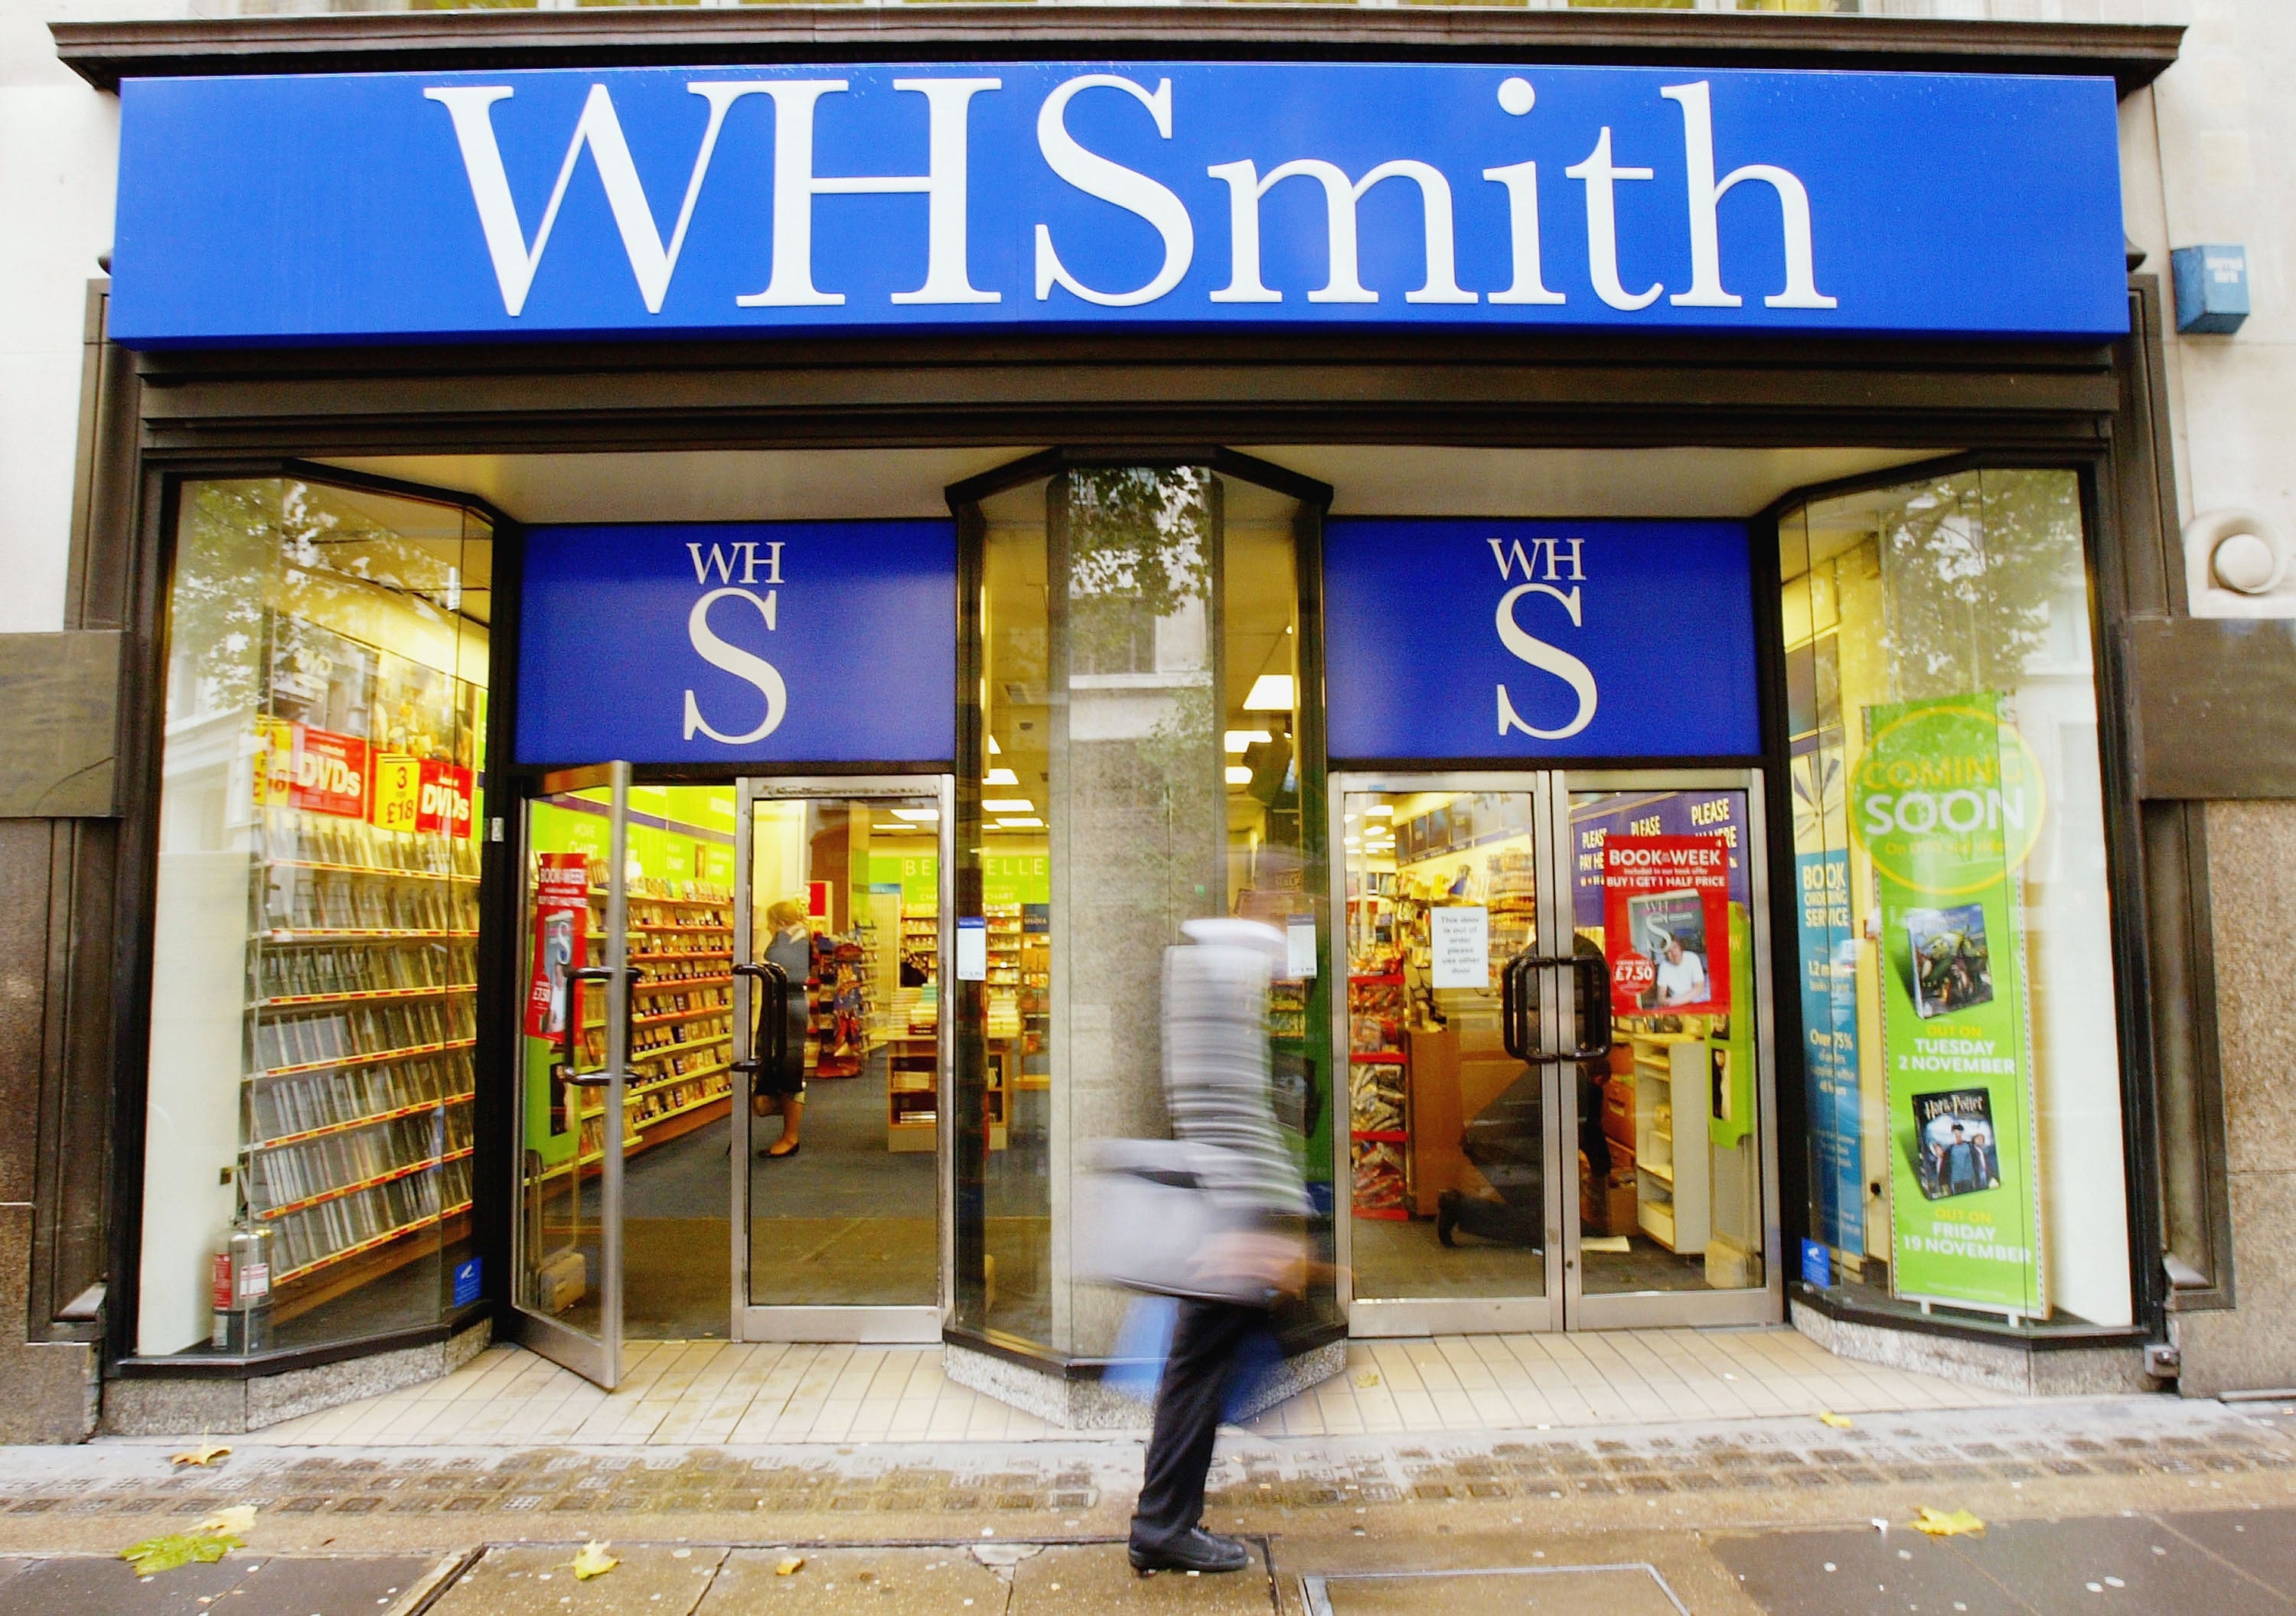 WH Smith executives hope that intitiative will encourage a ‘circular economy’ for its book customers